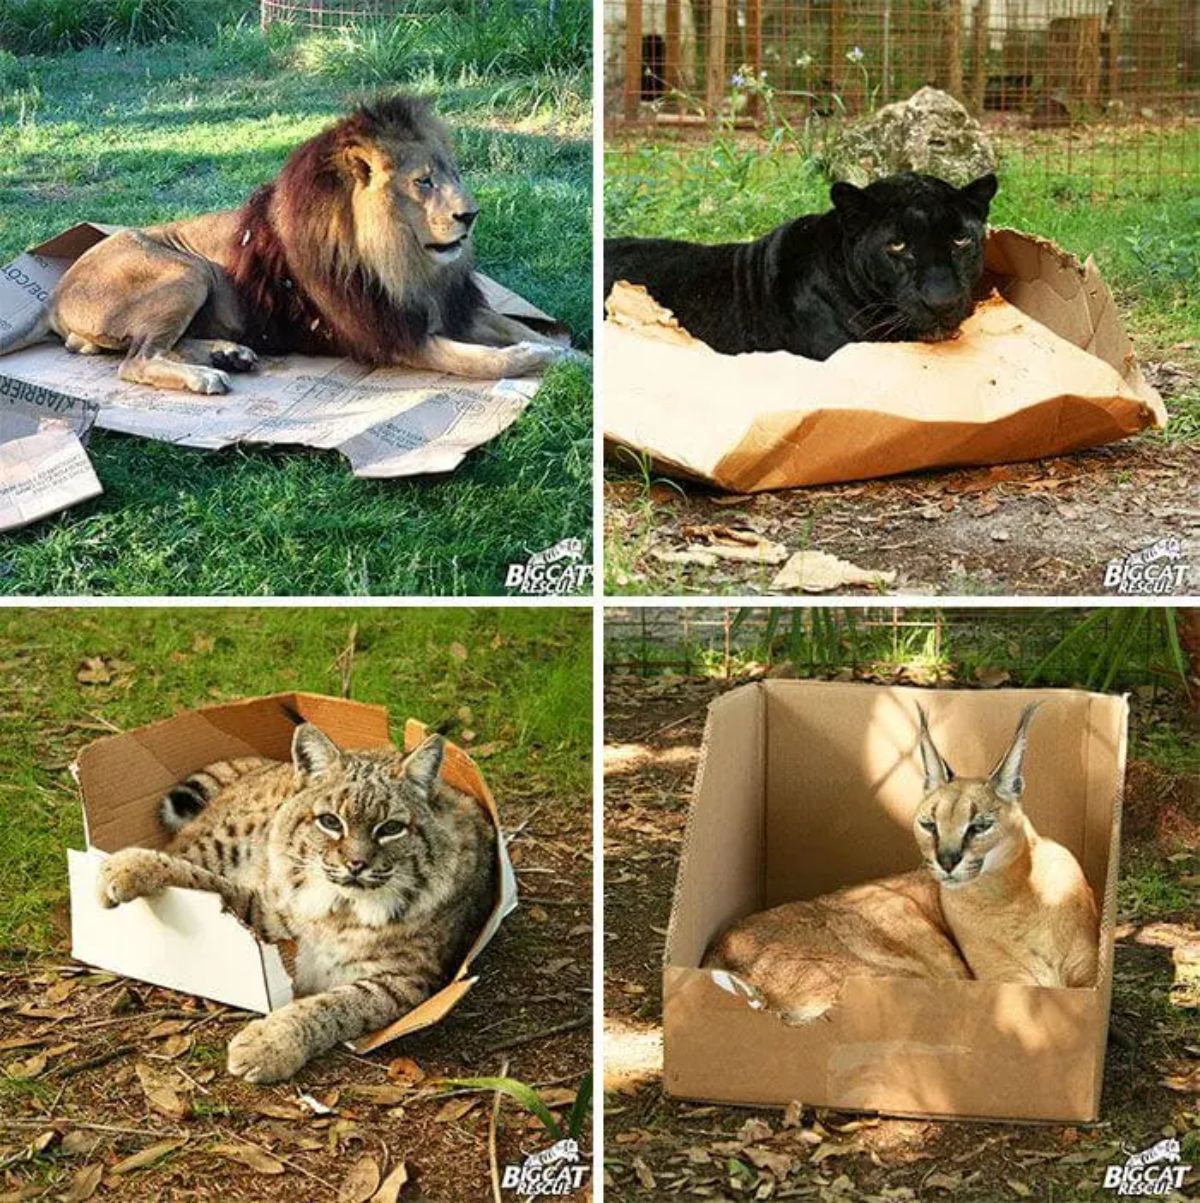 4 photos of a male lion, a black panther, a bobcat and a lynx sitting on or in cardboard boxes